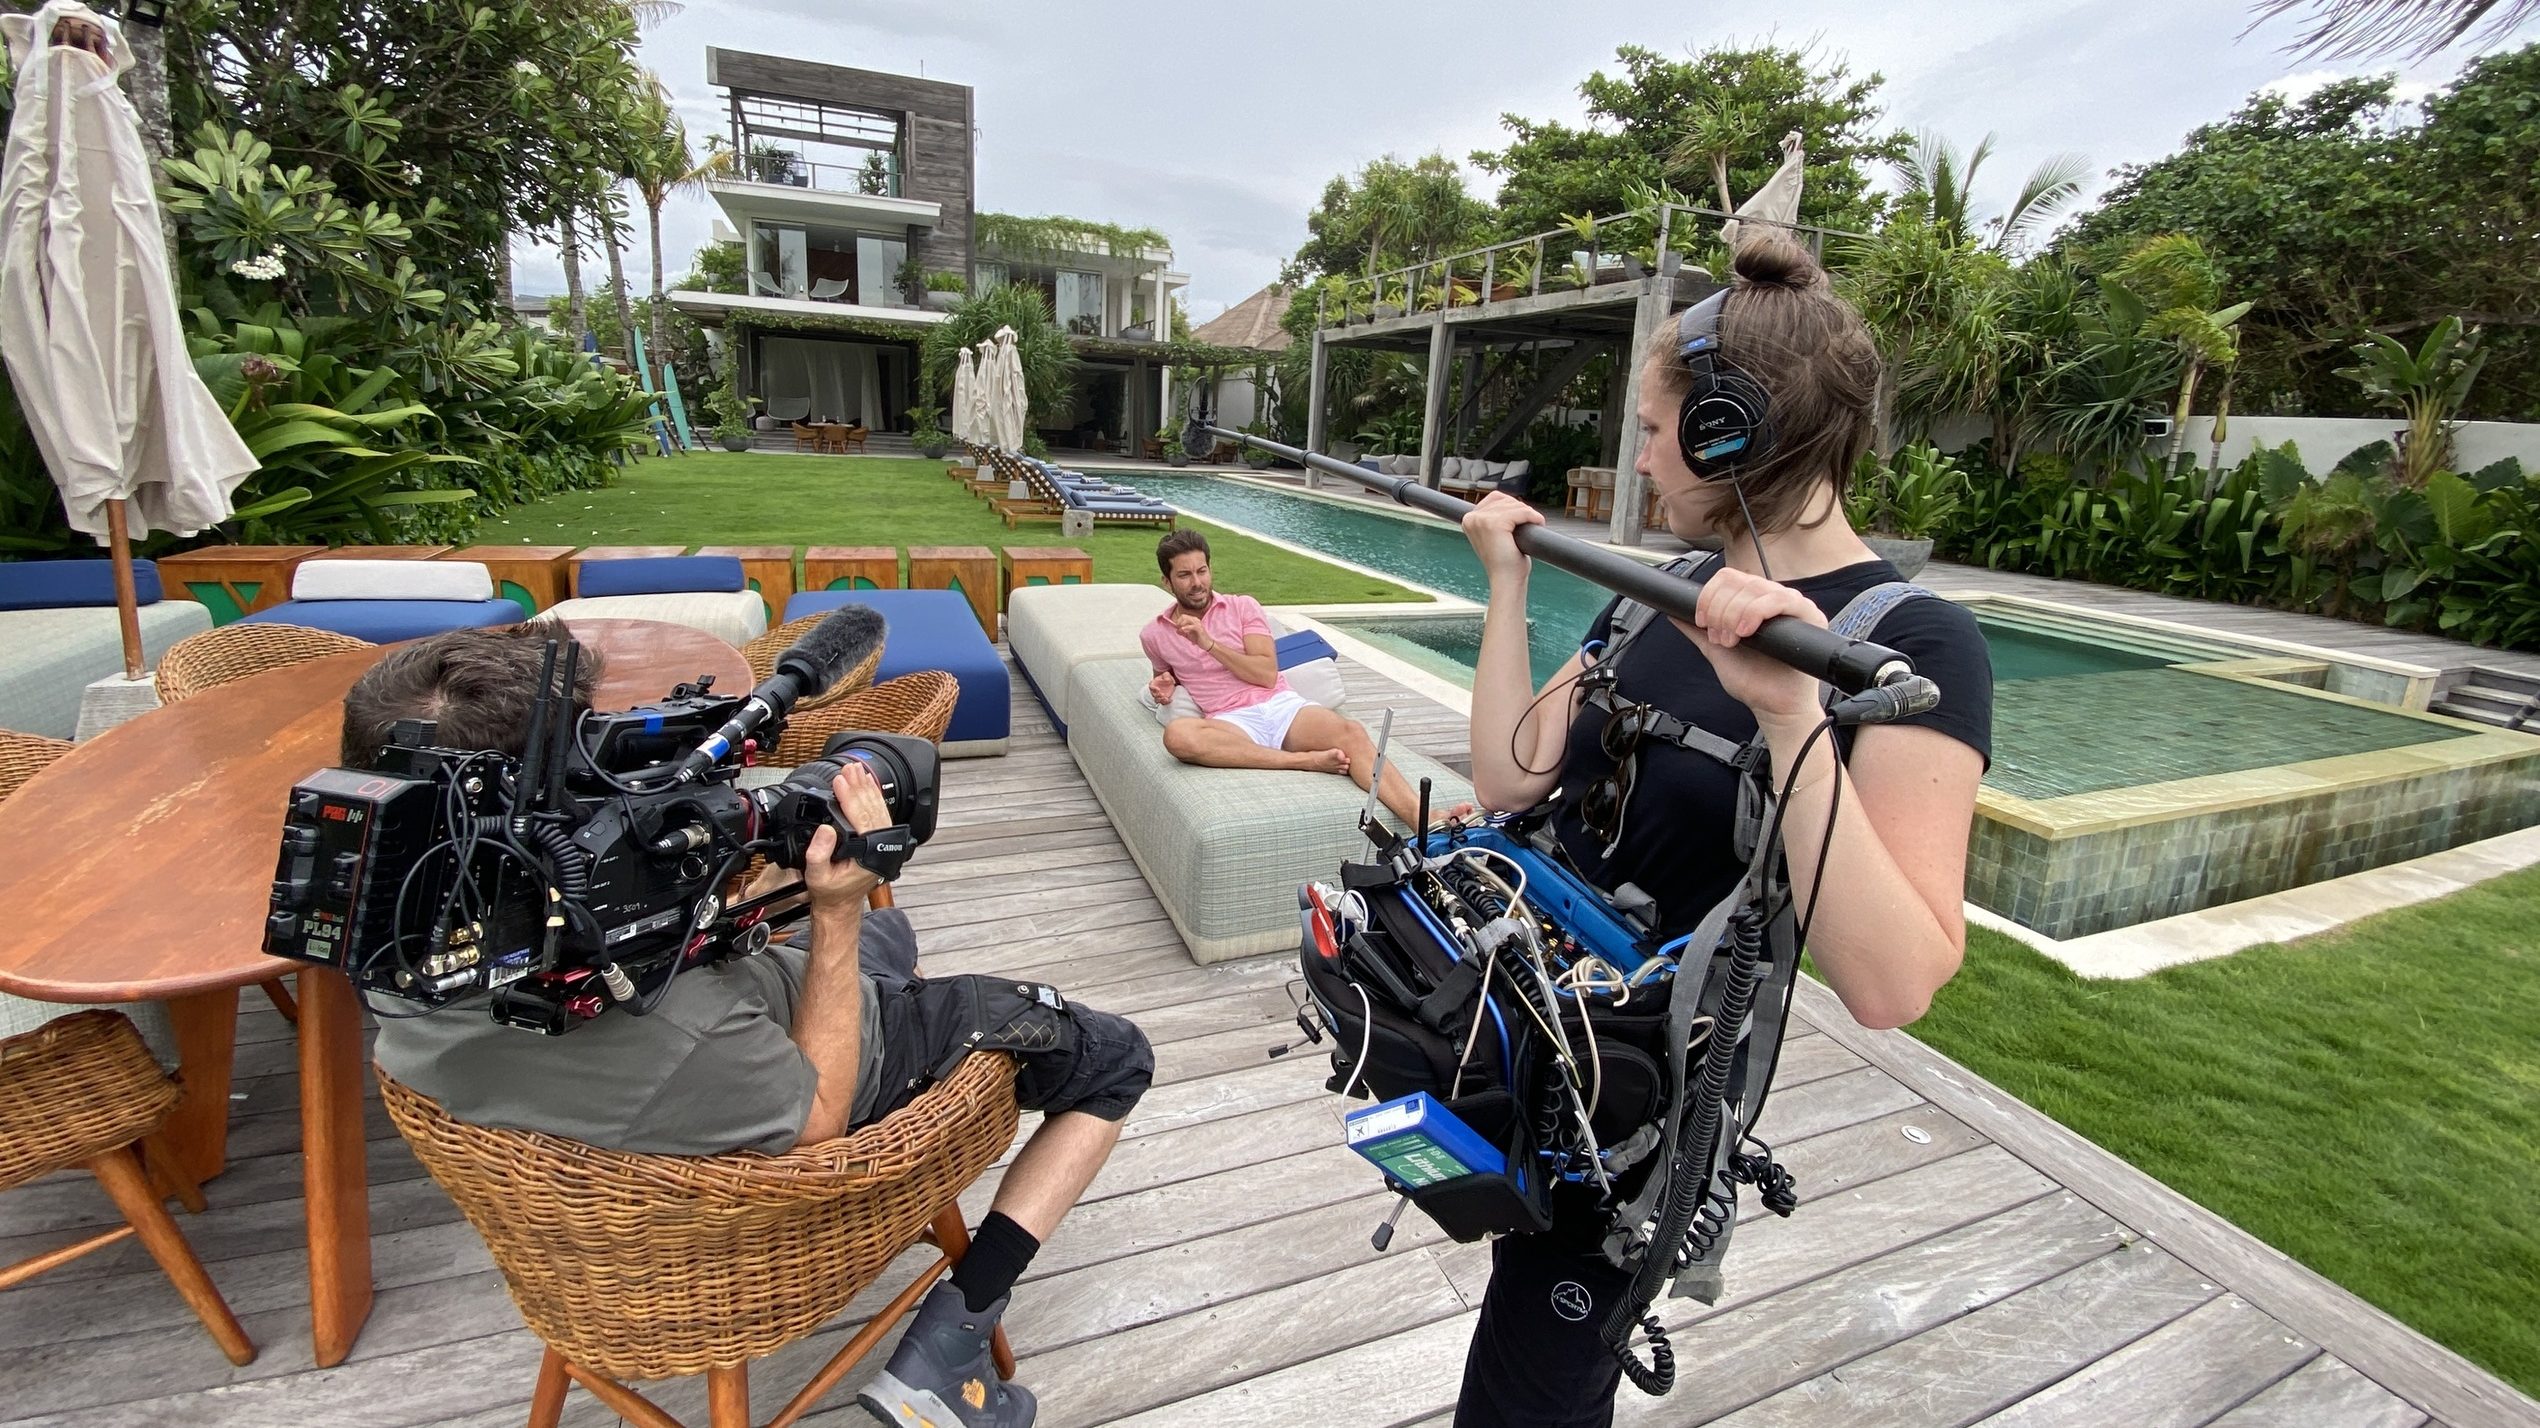 NoKu Beach House is One of Netflix’s ‘World’s Most Amazing Vacation